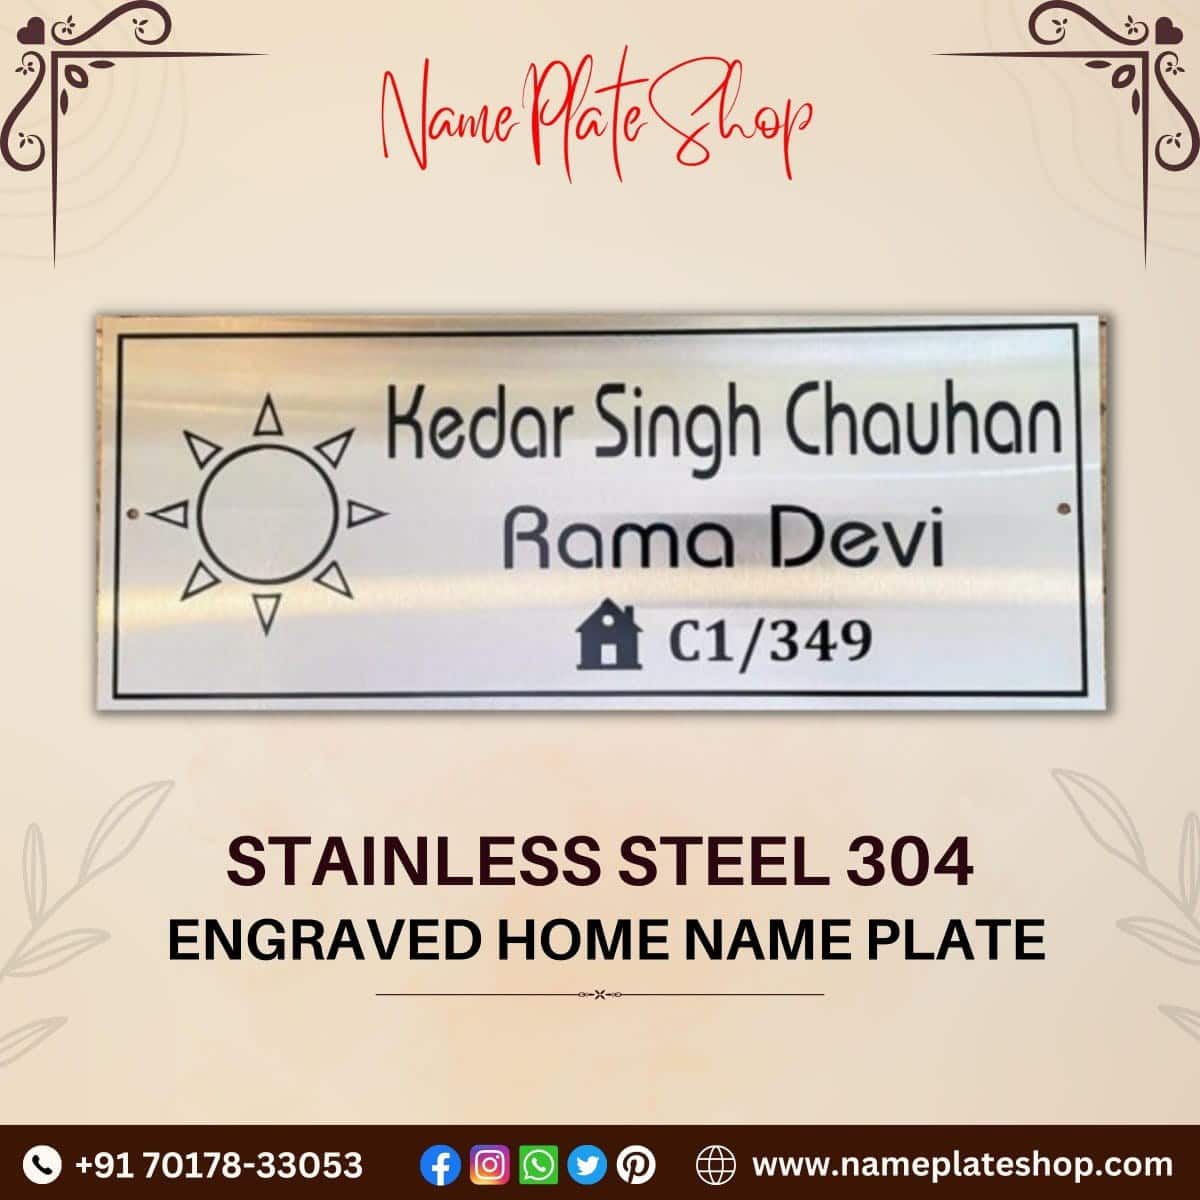 Stainless Steel Home Nameplate 304 Engraved